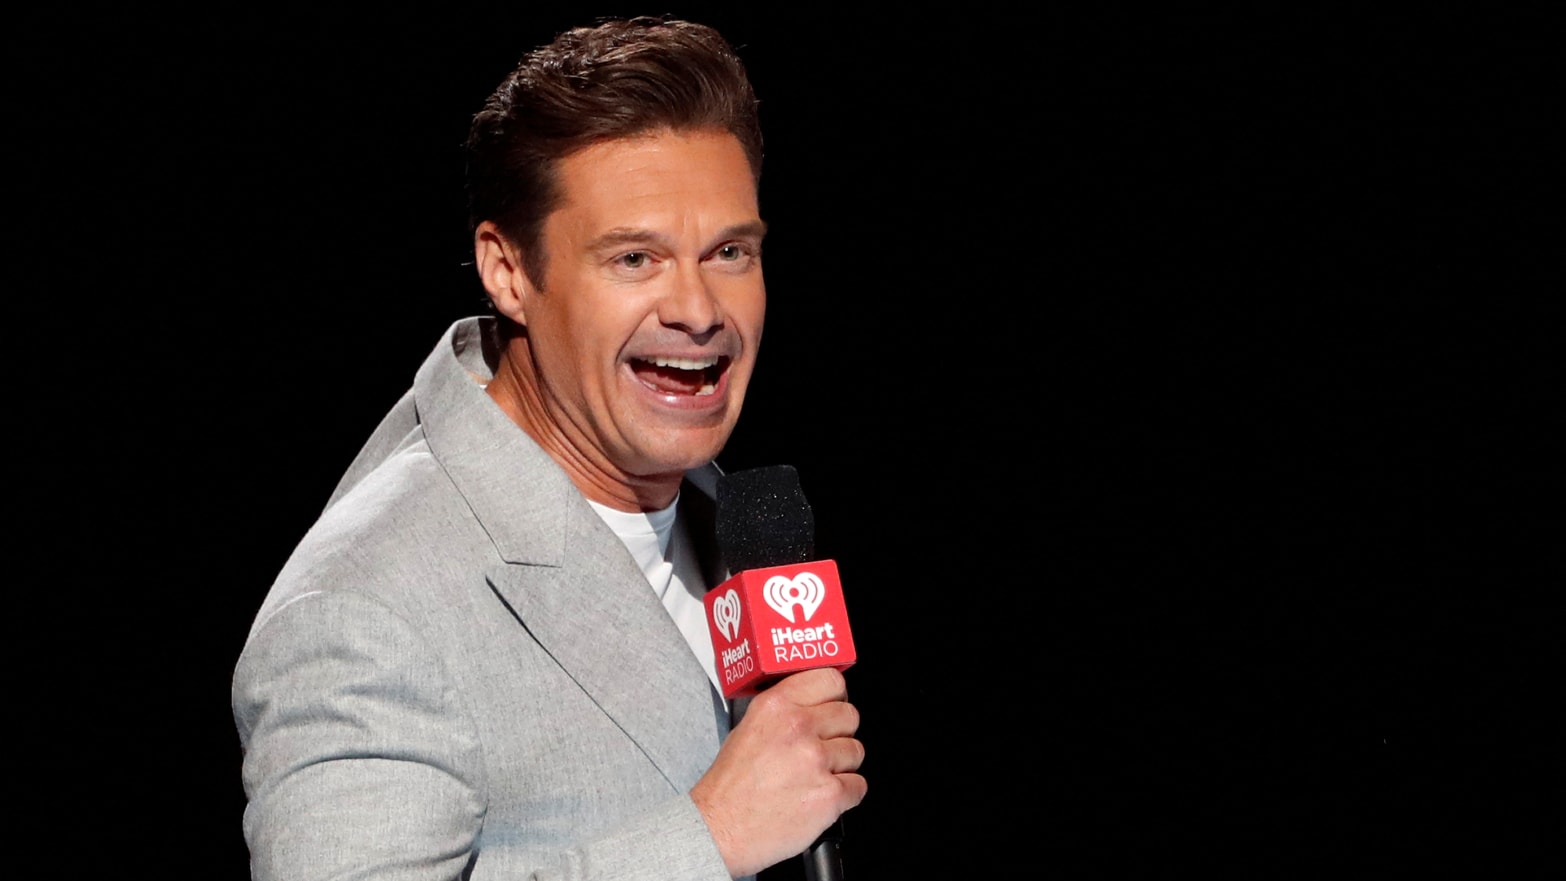 Ryan Seacrest introduces an act during the second day of the iHeartRadio Music Festival 2022 at T-Mobile Arena in Las Vegas, Nevada, U.S. September 24, 2022. 